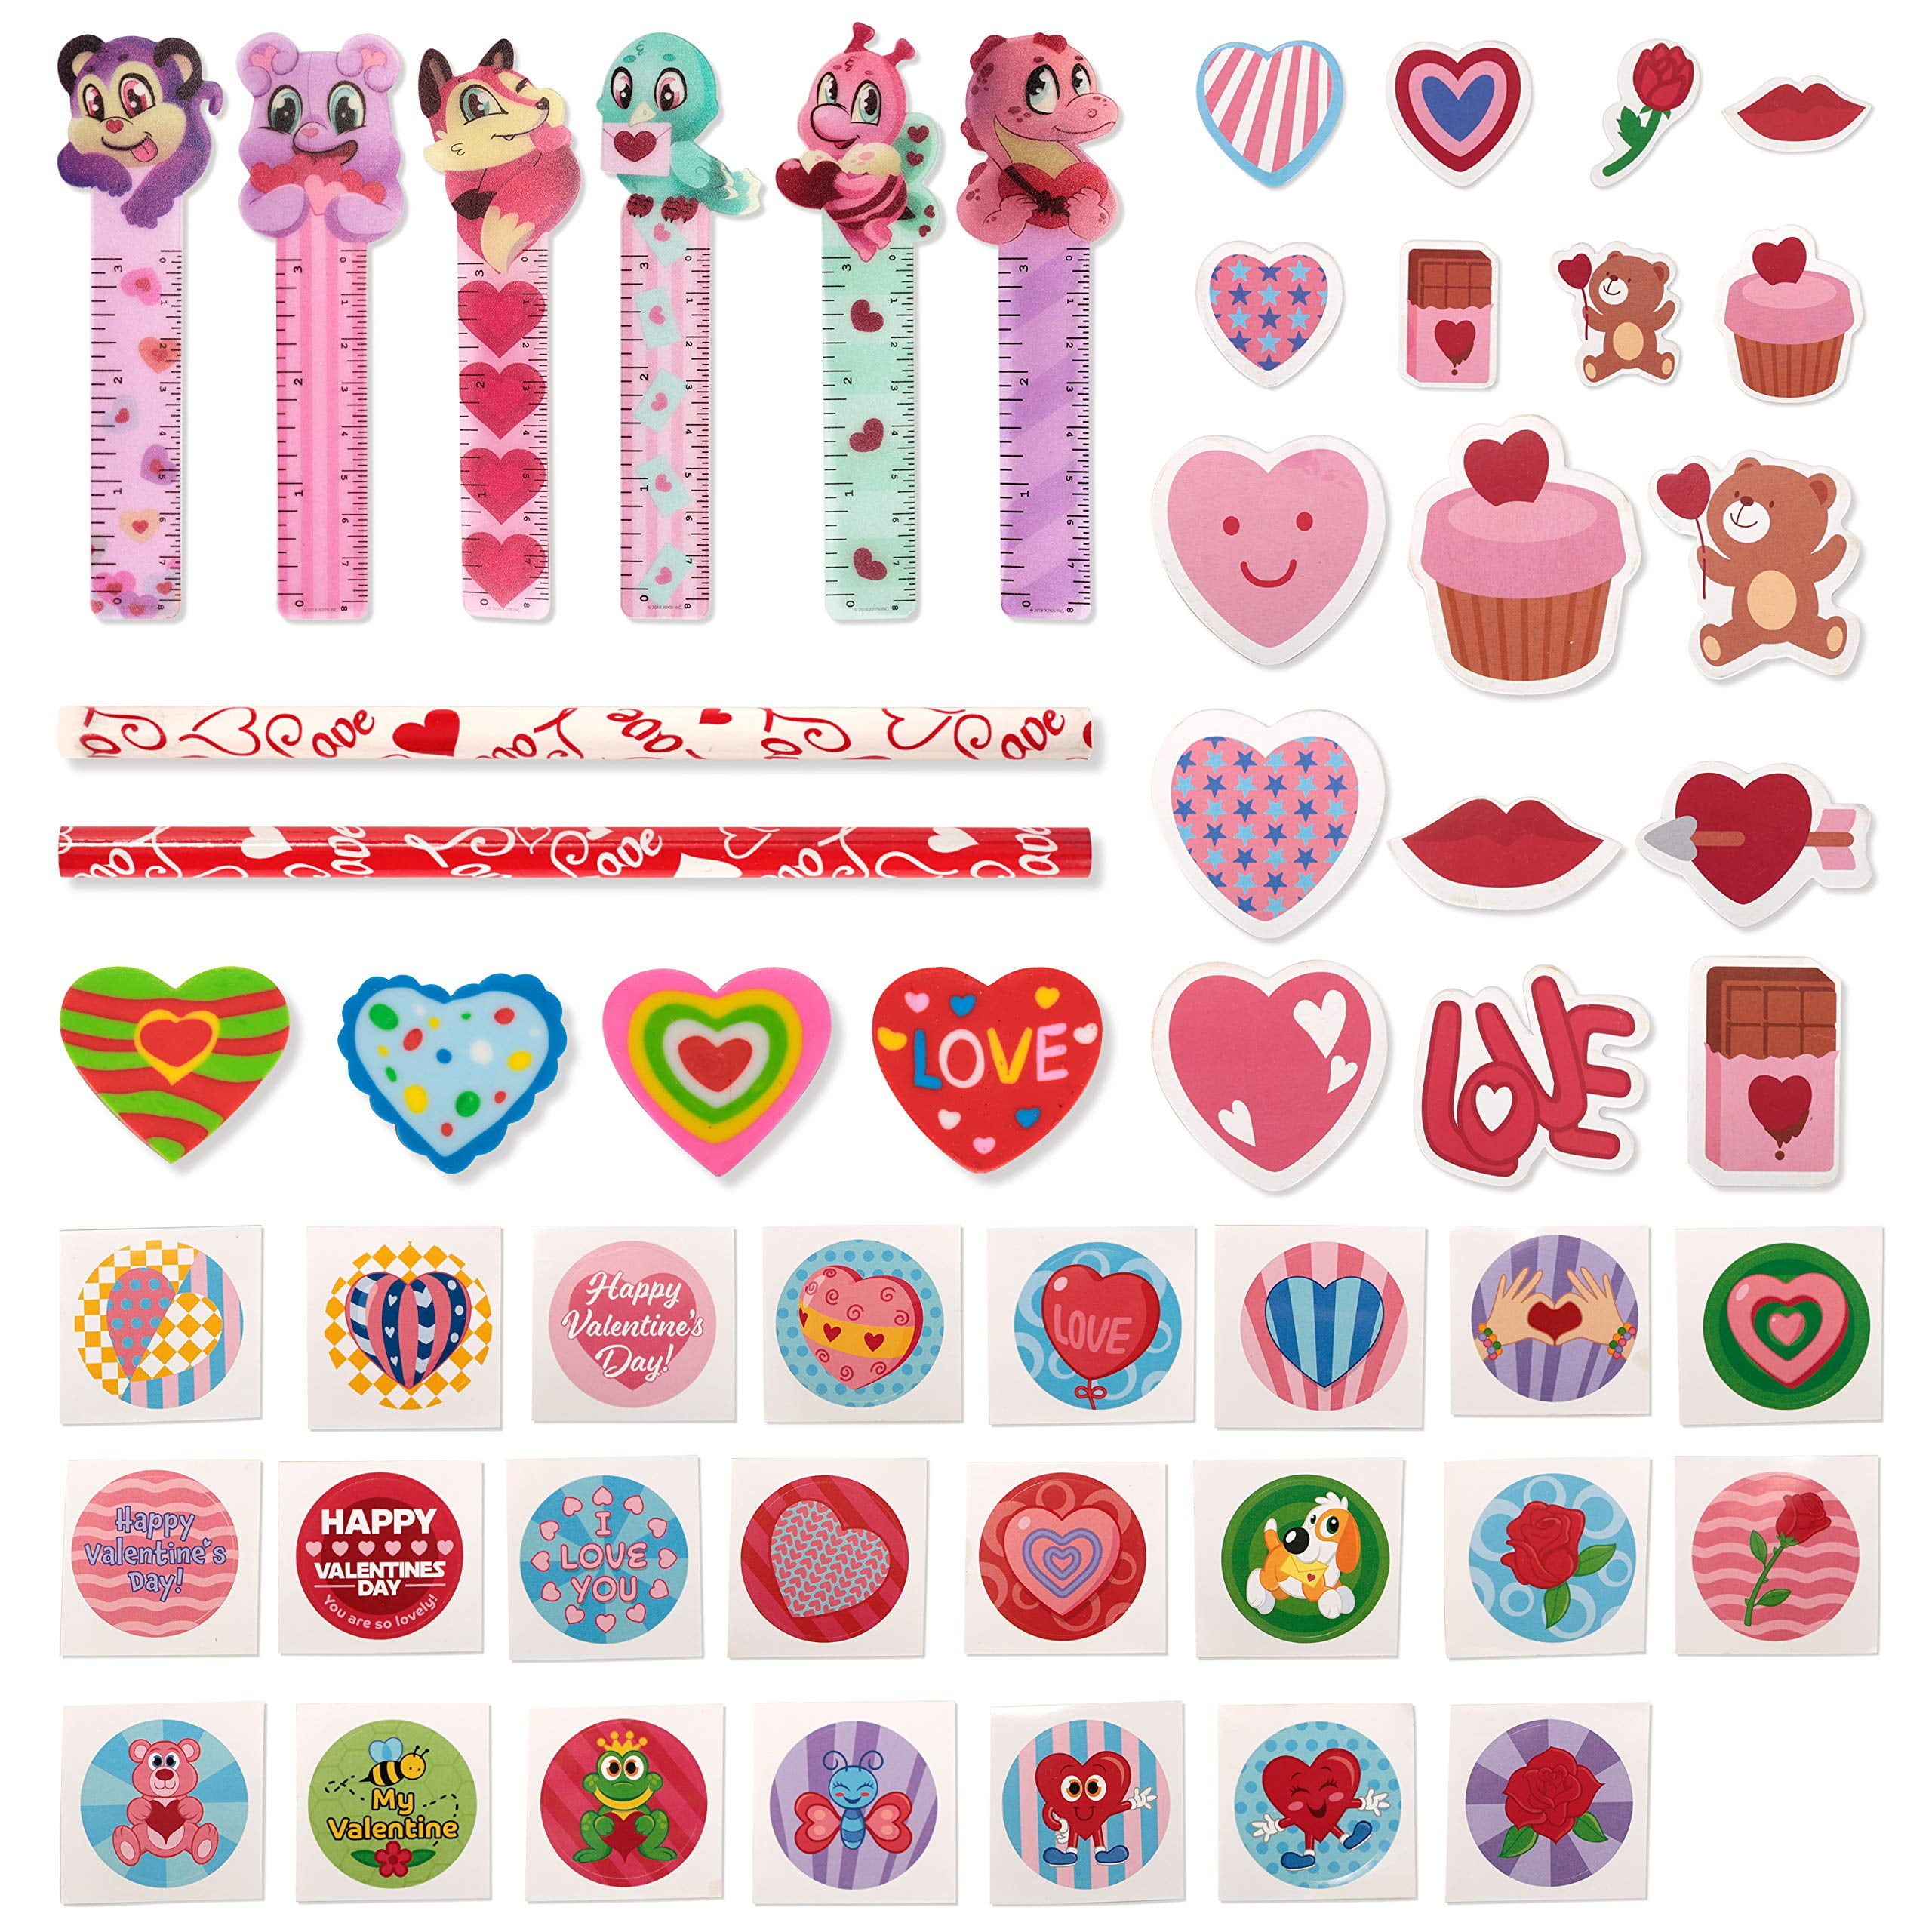 JOYIN 28 Pack Valentines Day Stationery Set with Treat Bags for Kids Party Favor, Classroom Exchange prizes?includes notebooks,rule